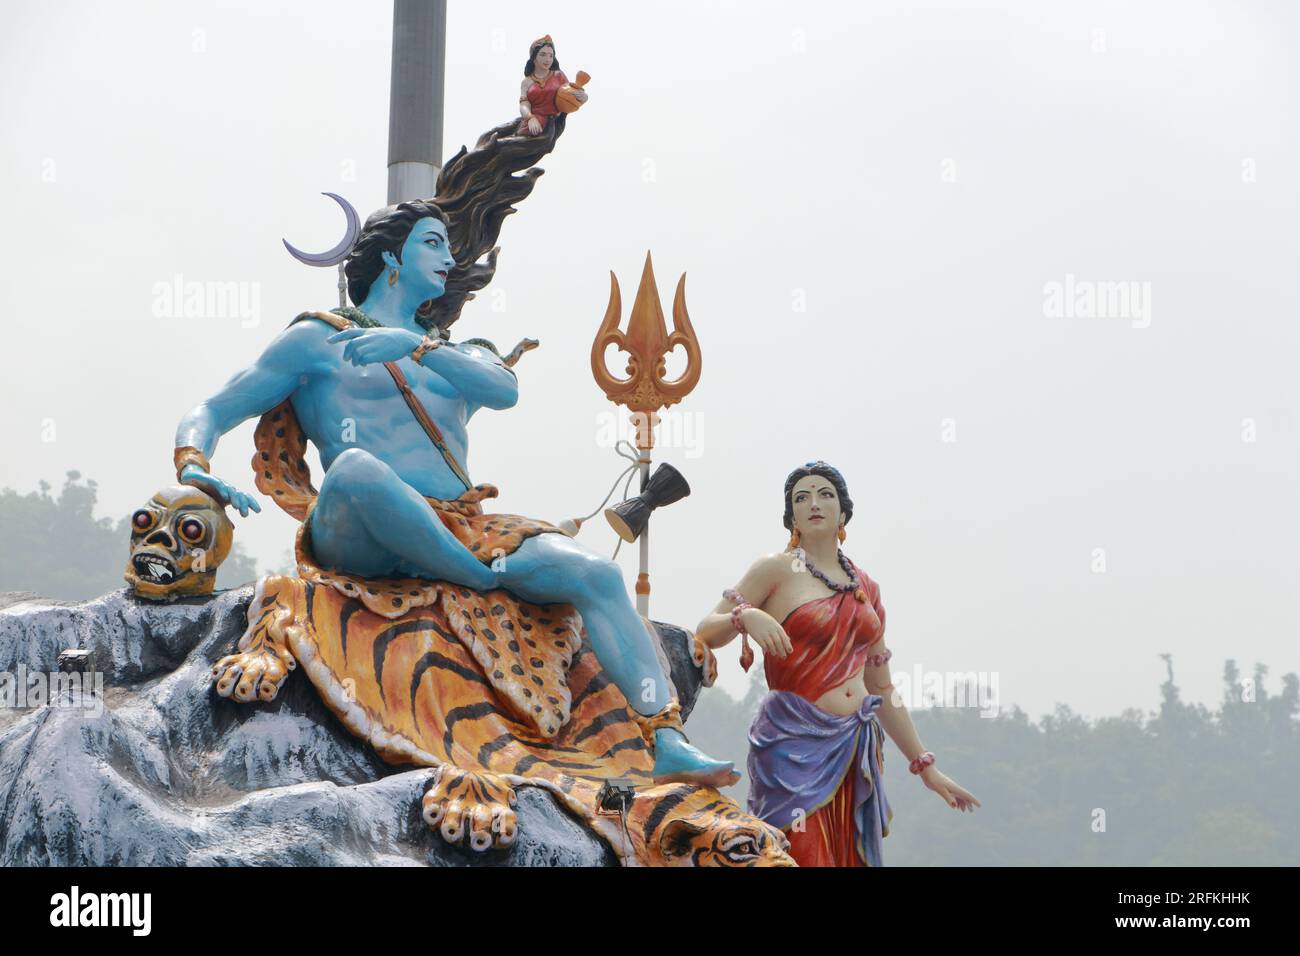 Giant statue of Lord Shiva and Parvati at Triveni Ghat, Rishikesh, with Lord Shiva sitting on the back of a tiger and Goddess Ganga. Stock Photo